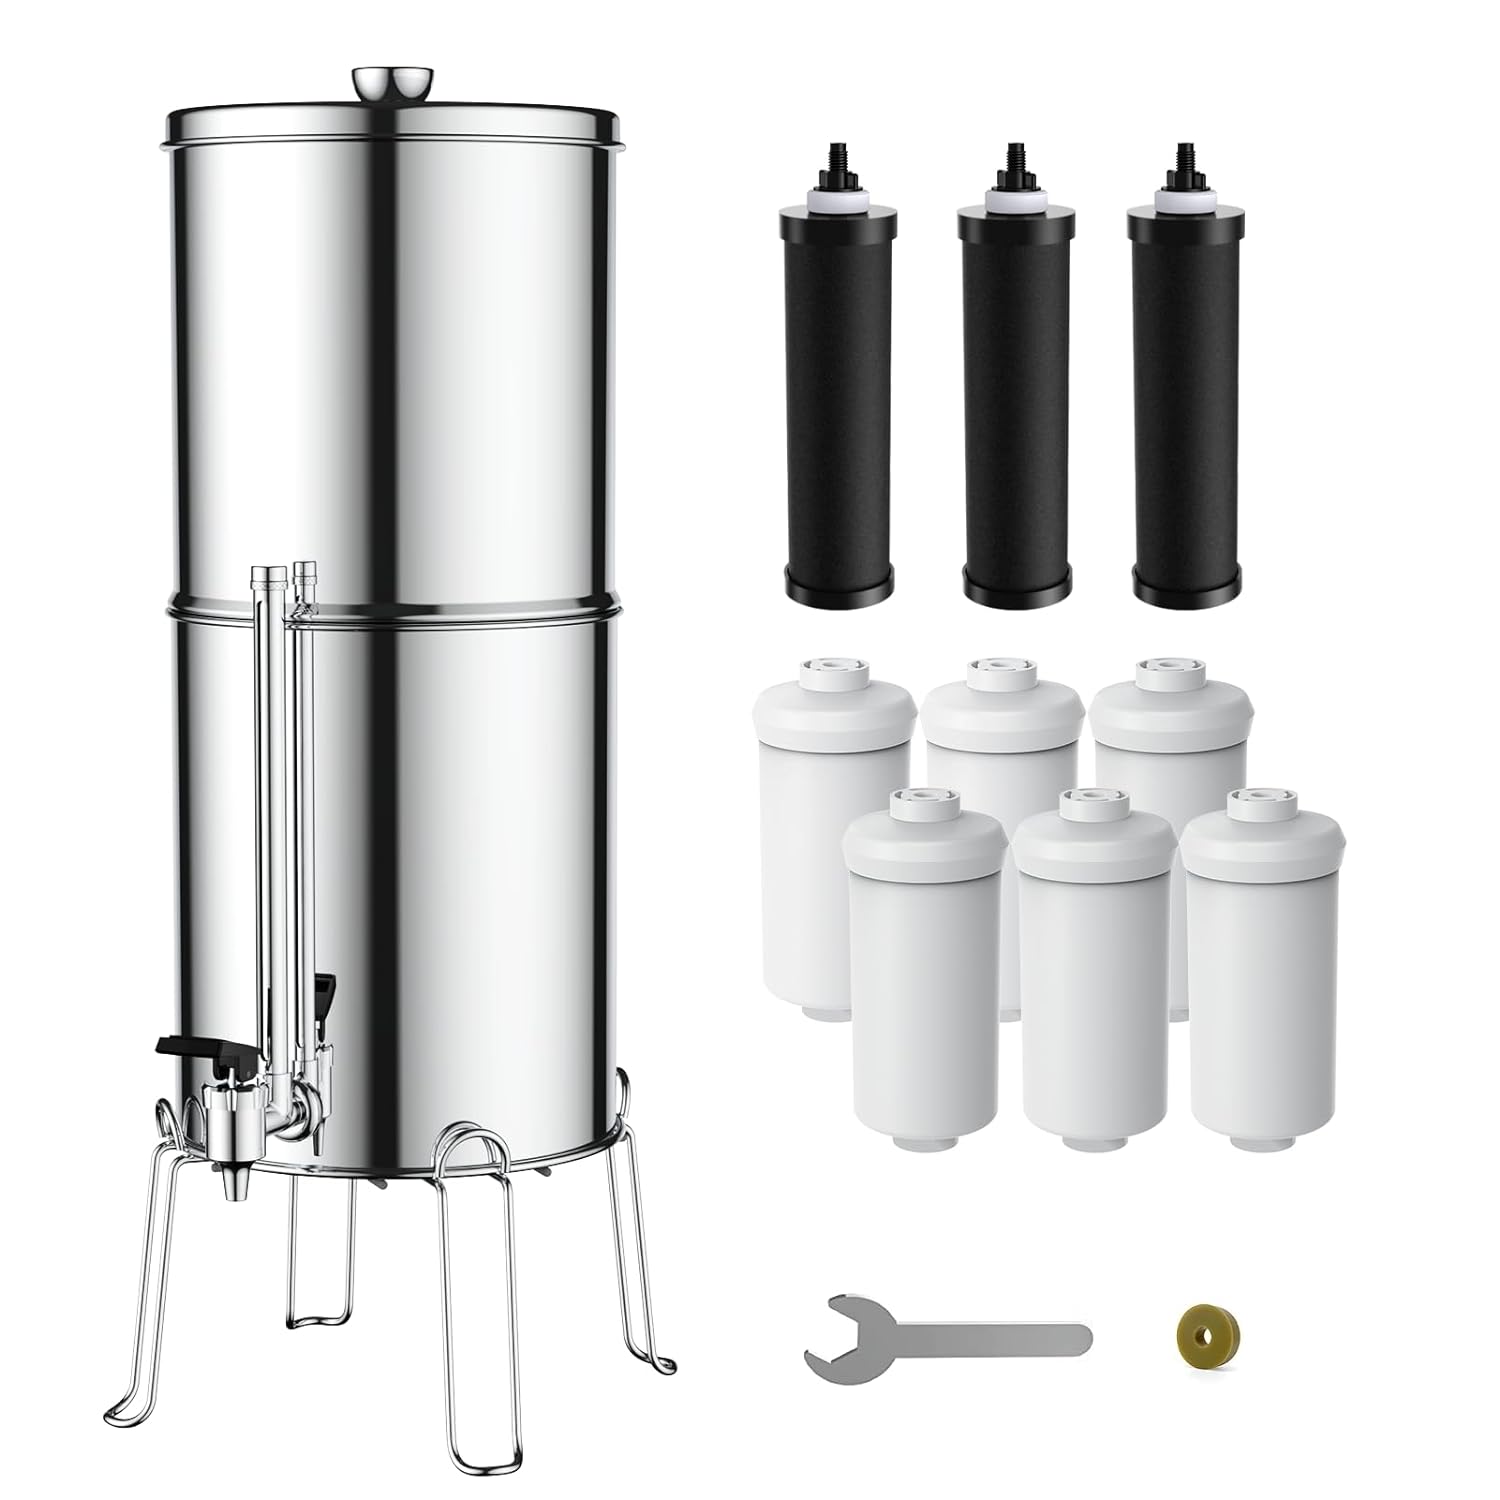 Glacier Fresh Gravity-fed Water Filter System with 9 Filters, 3G Stainless-Steel System, Metal Water Level Spigot, and Stand